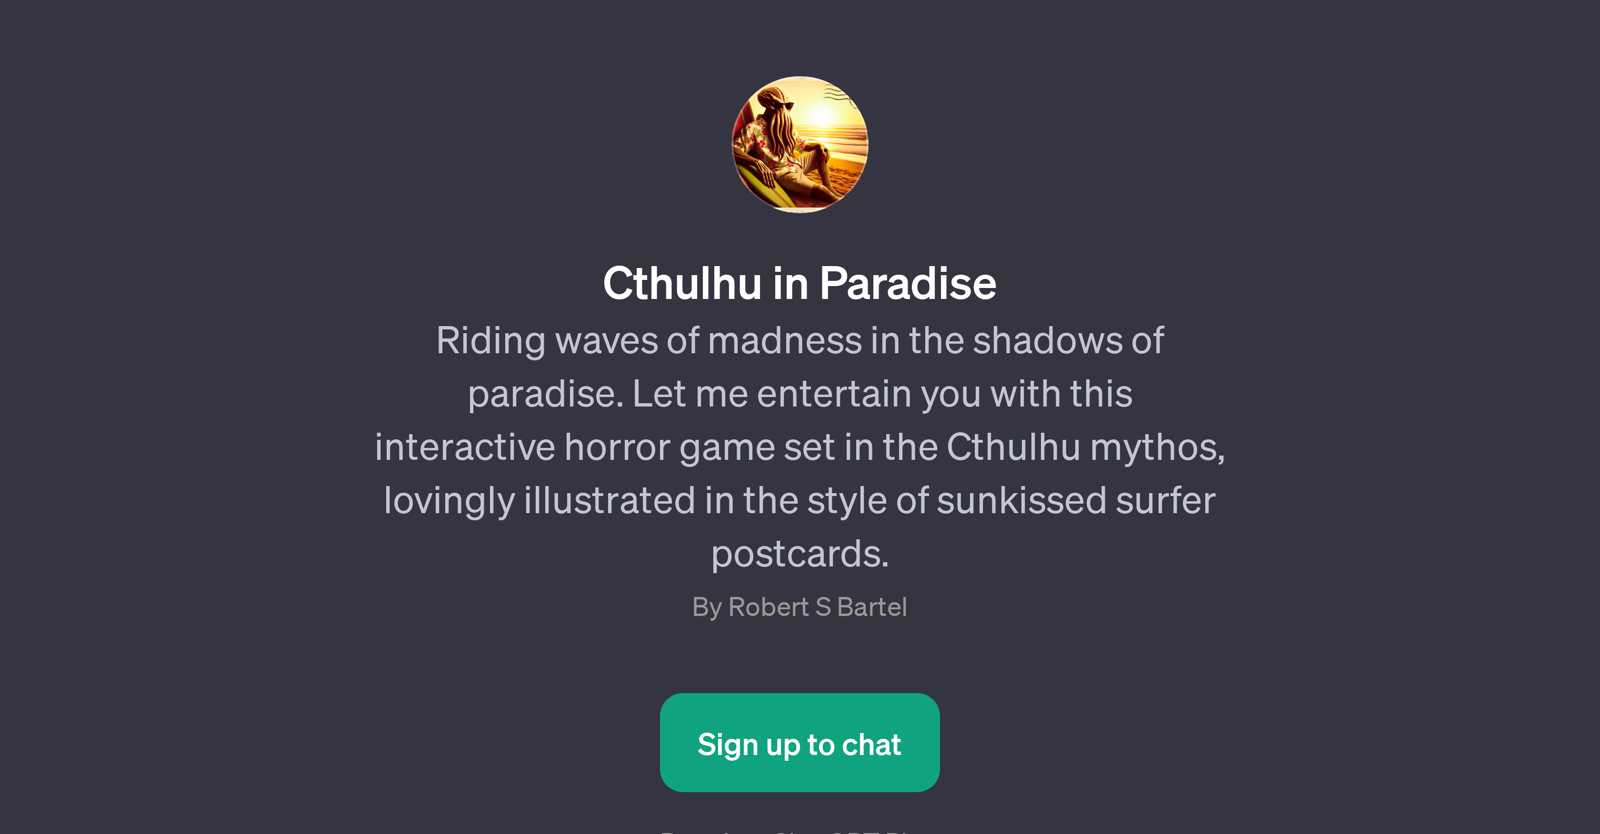 Cthulhu in Paradise website